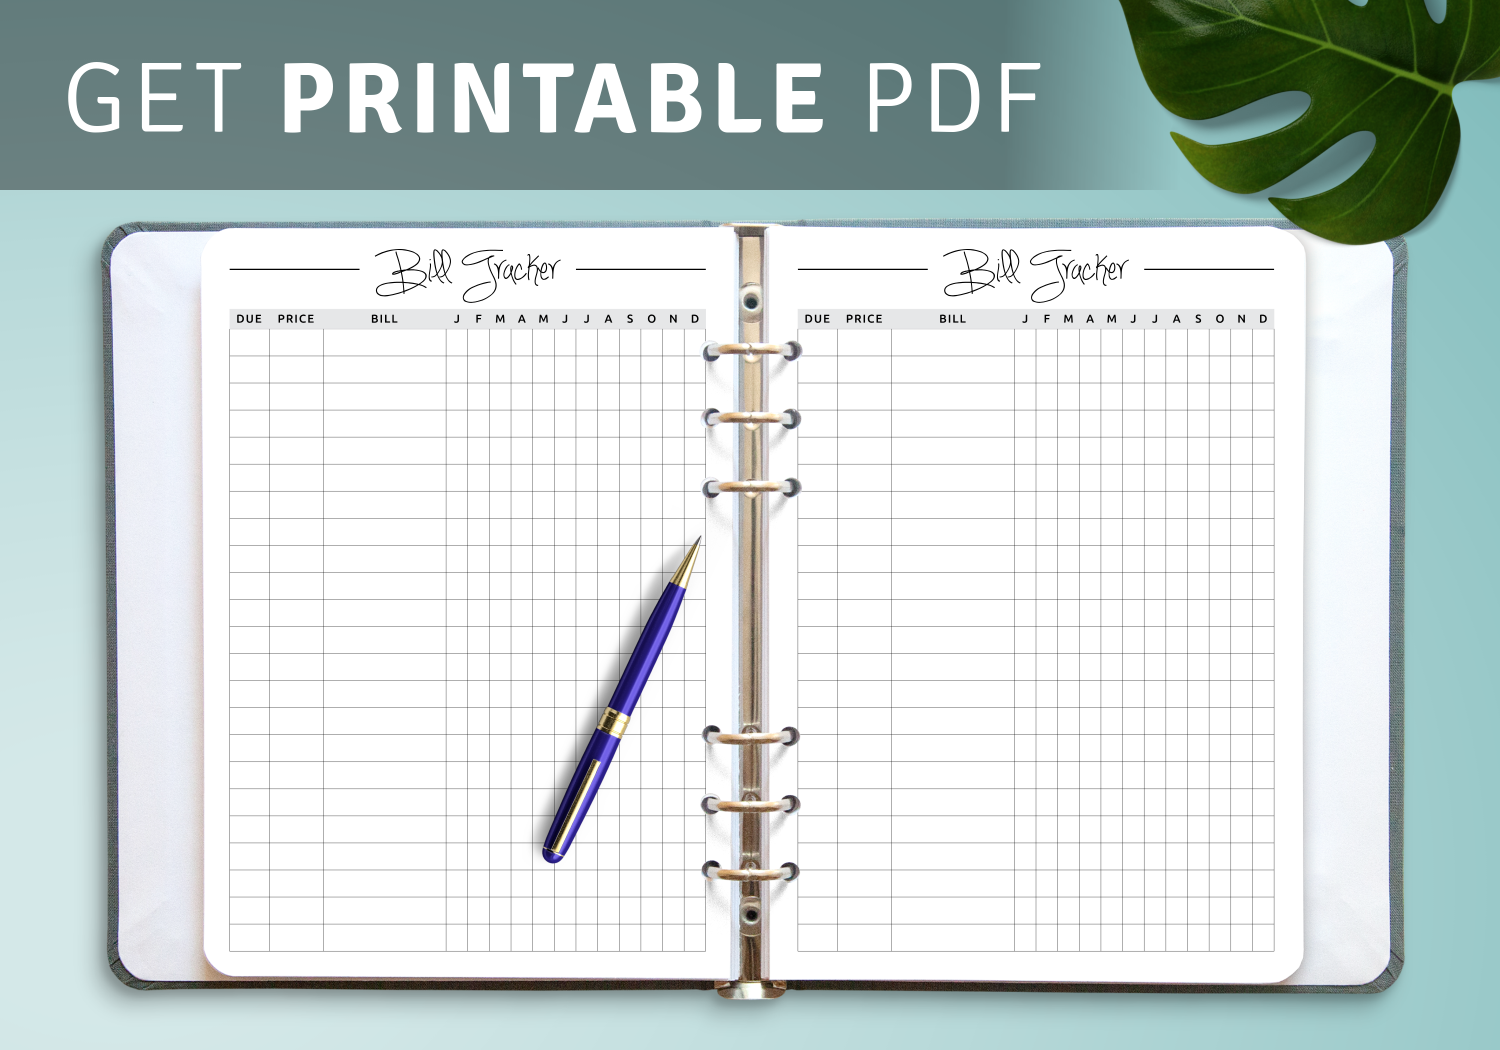 download-printable-square-grid-monthly-bill-tracker-pdf